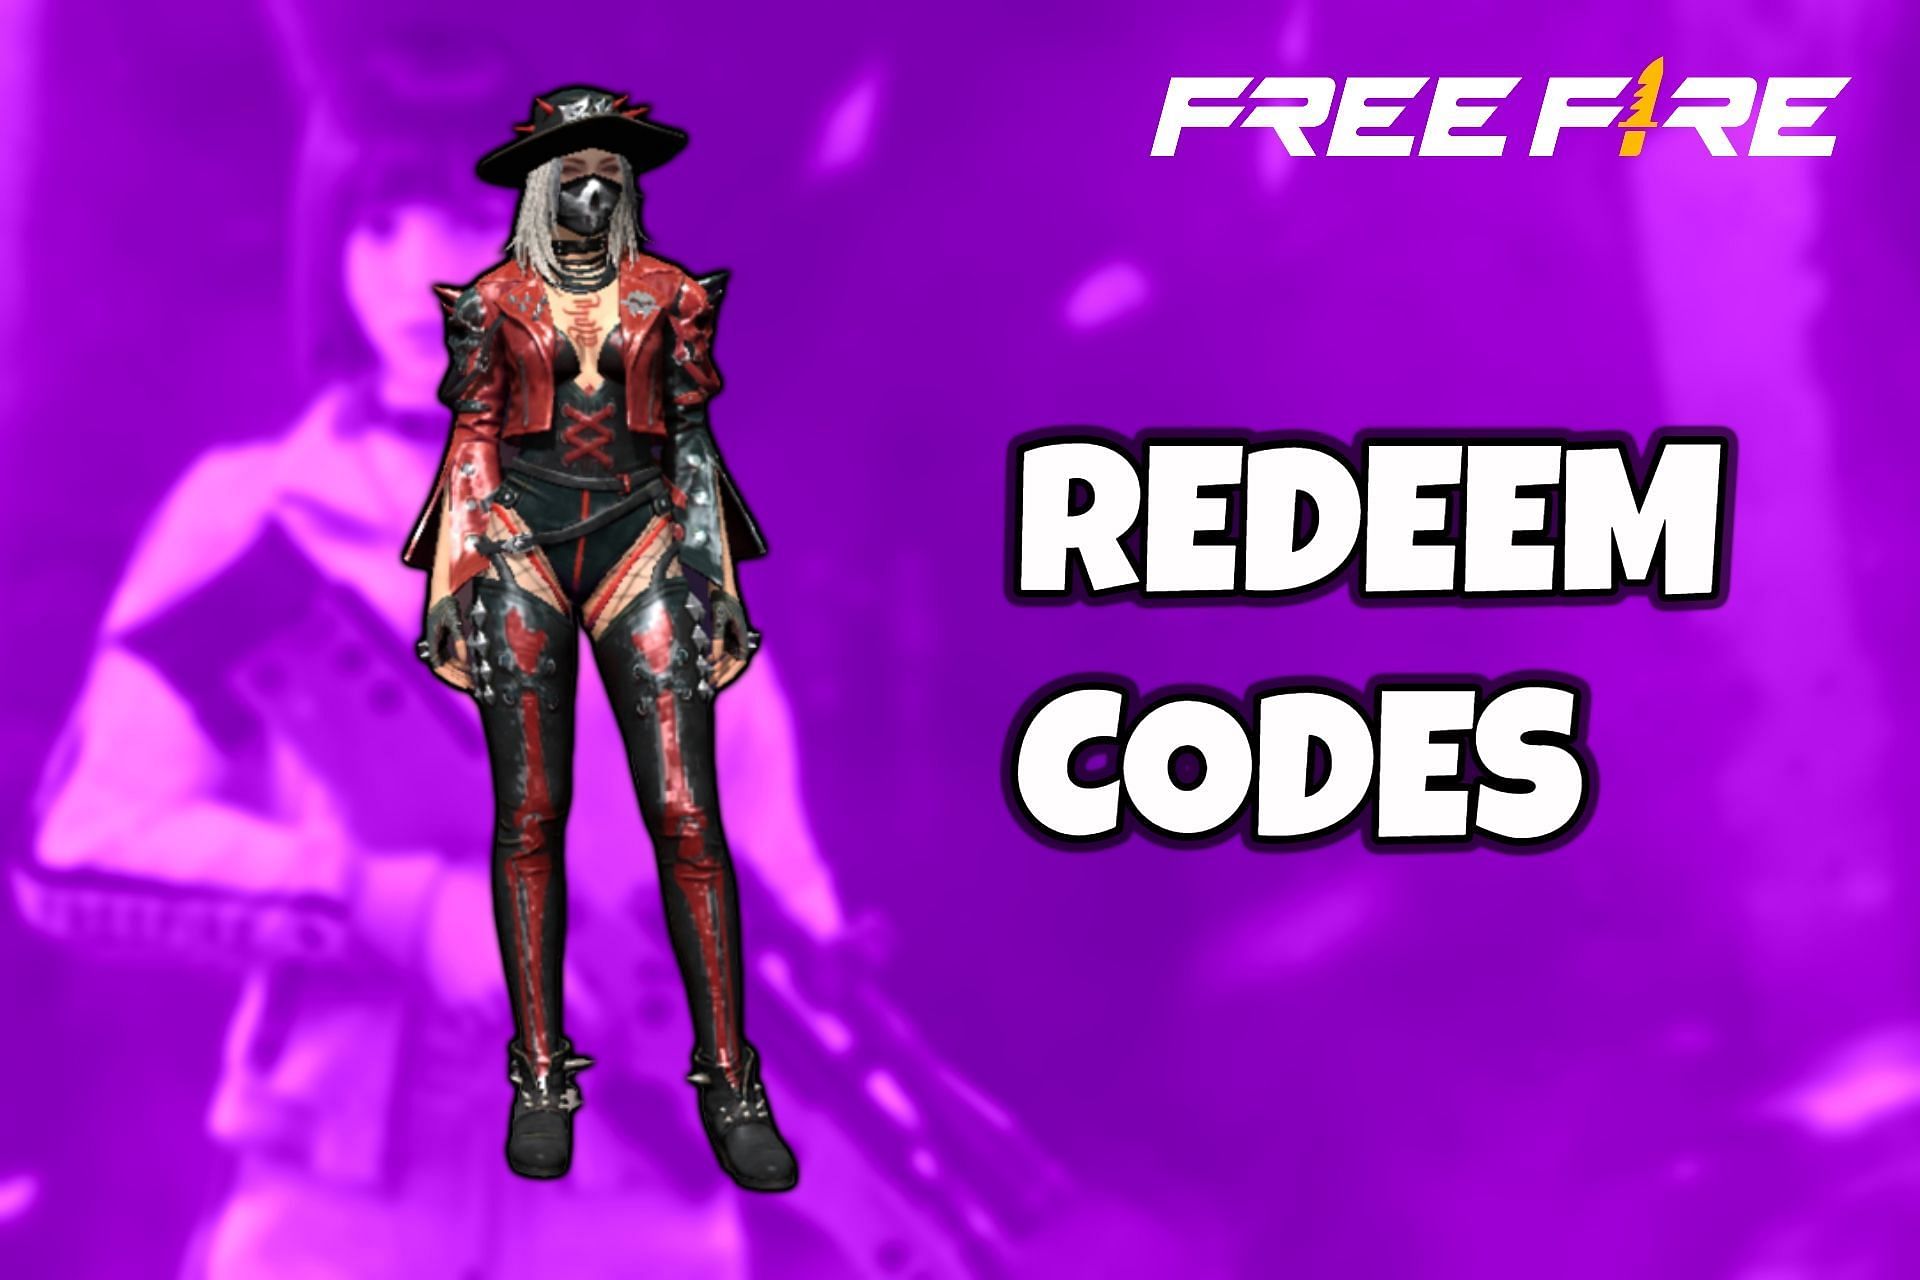 Users inside Free Fire can use redeem codes if they want free rewards (Image via Sportskeeda)